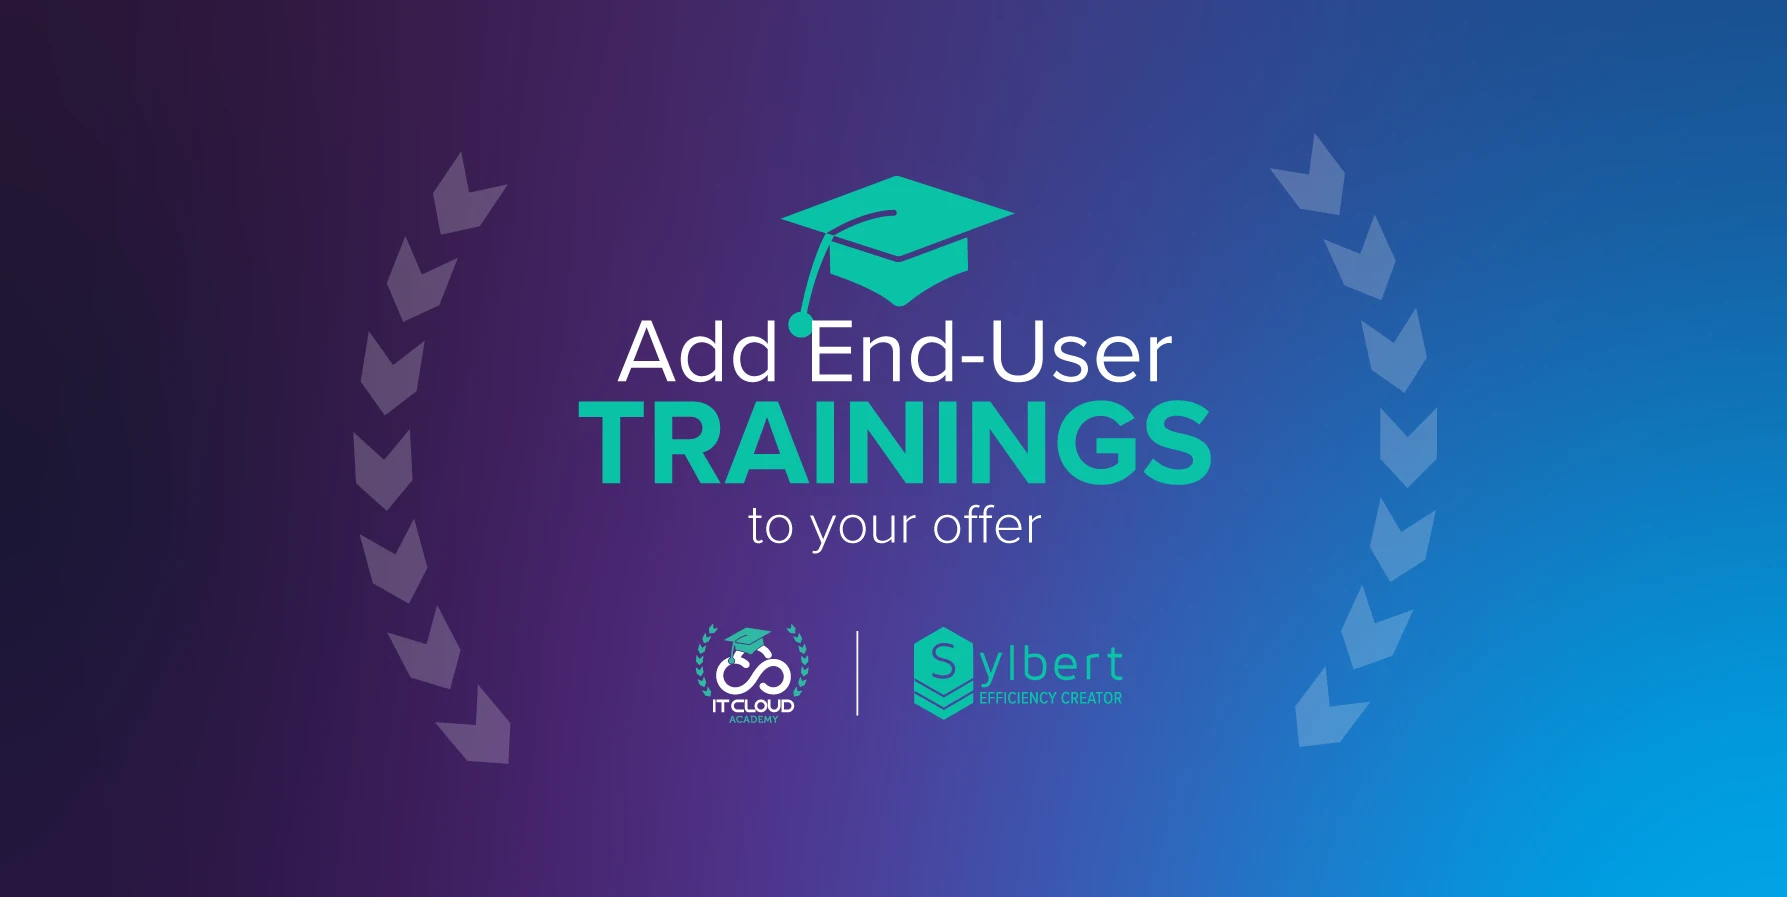 ITCloud Academy End-Users Training partnership with Sylbert